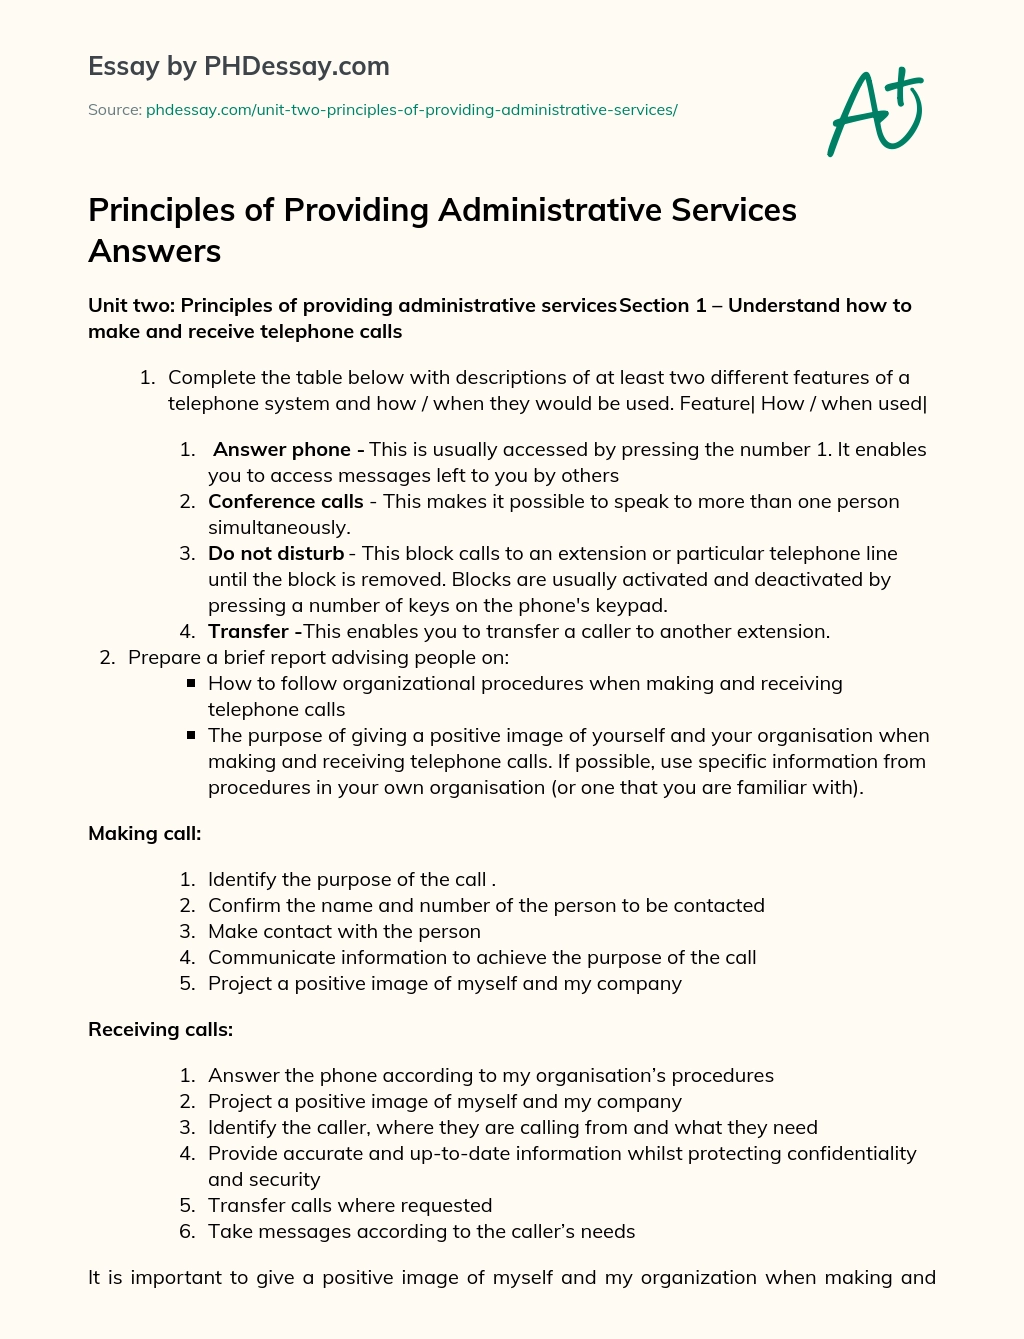 Principles of Providing Administrative Services Answers essay